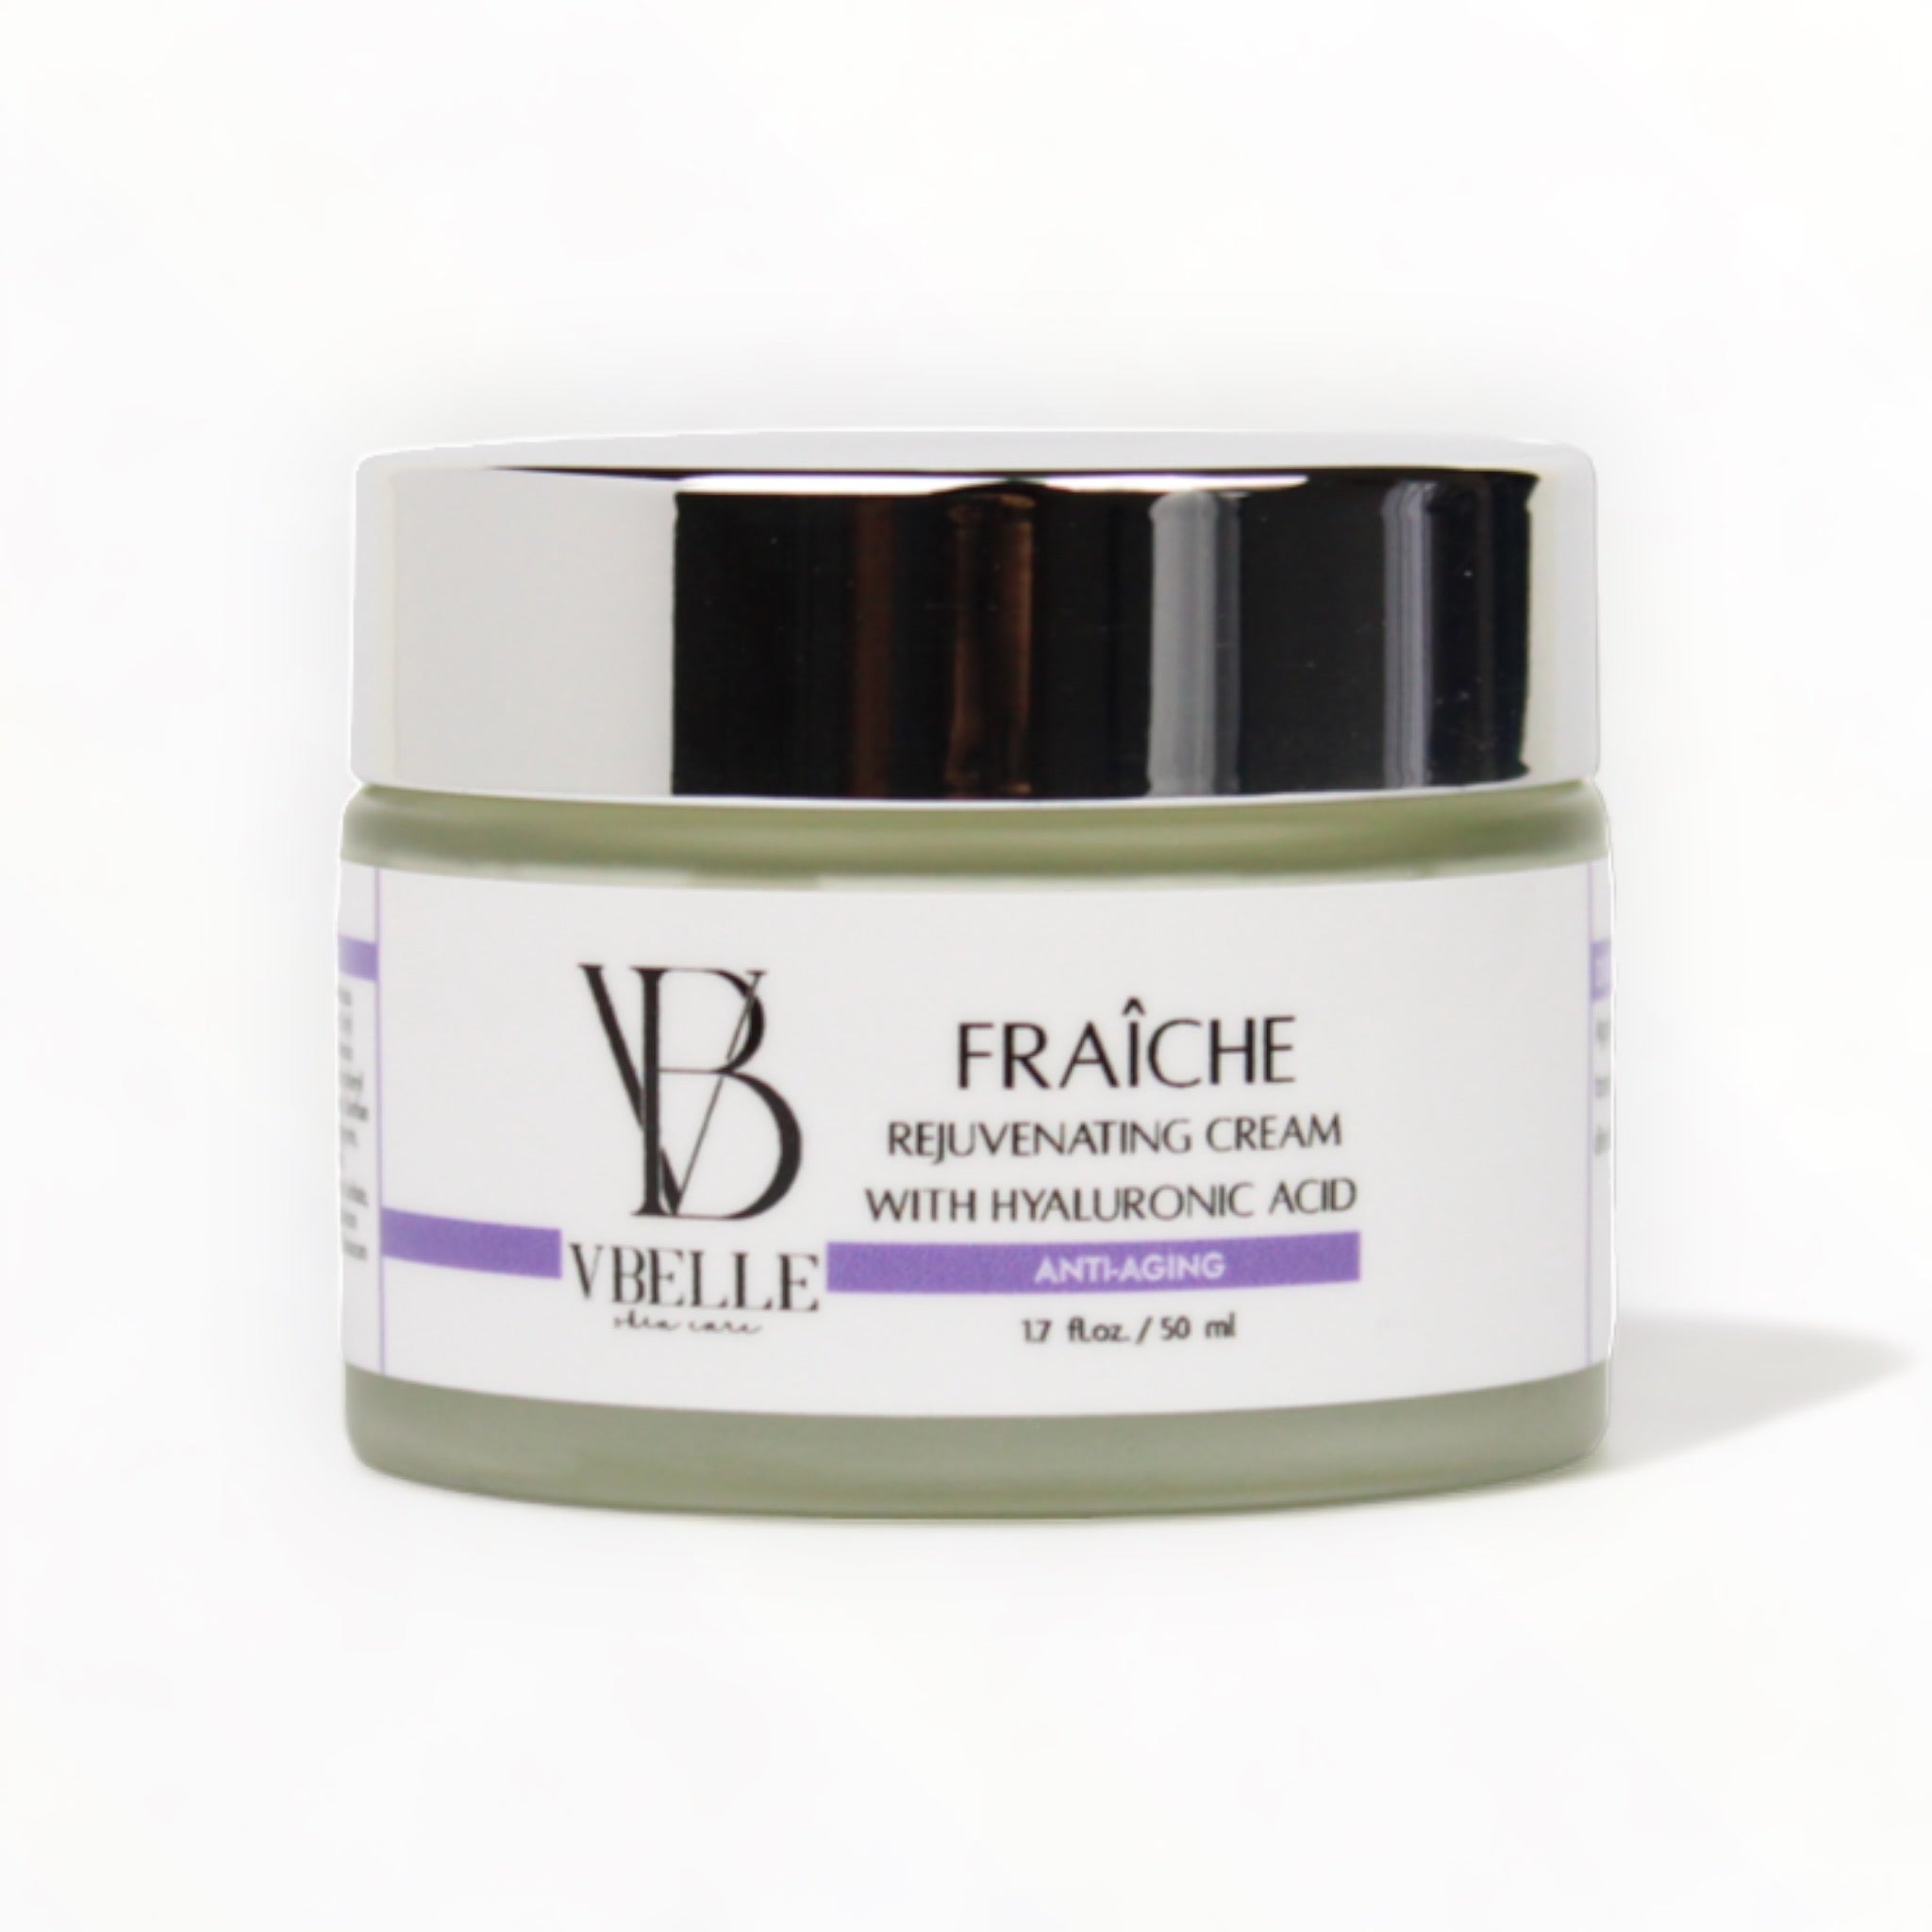 Organic fraiche rejuvenating face cream with hyaluronic acid in a 1.7 fl oz jar with a white background